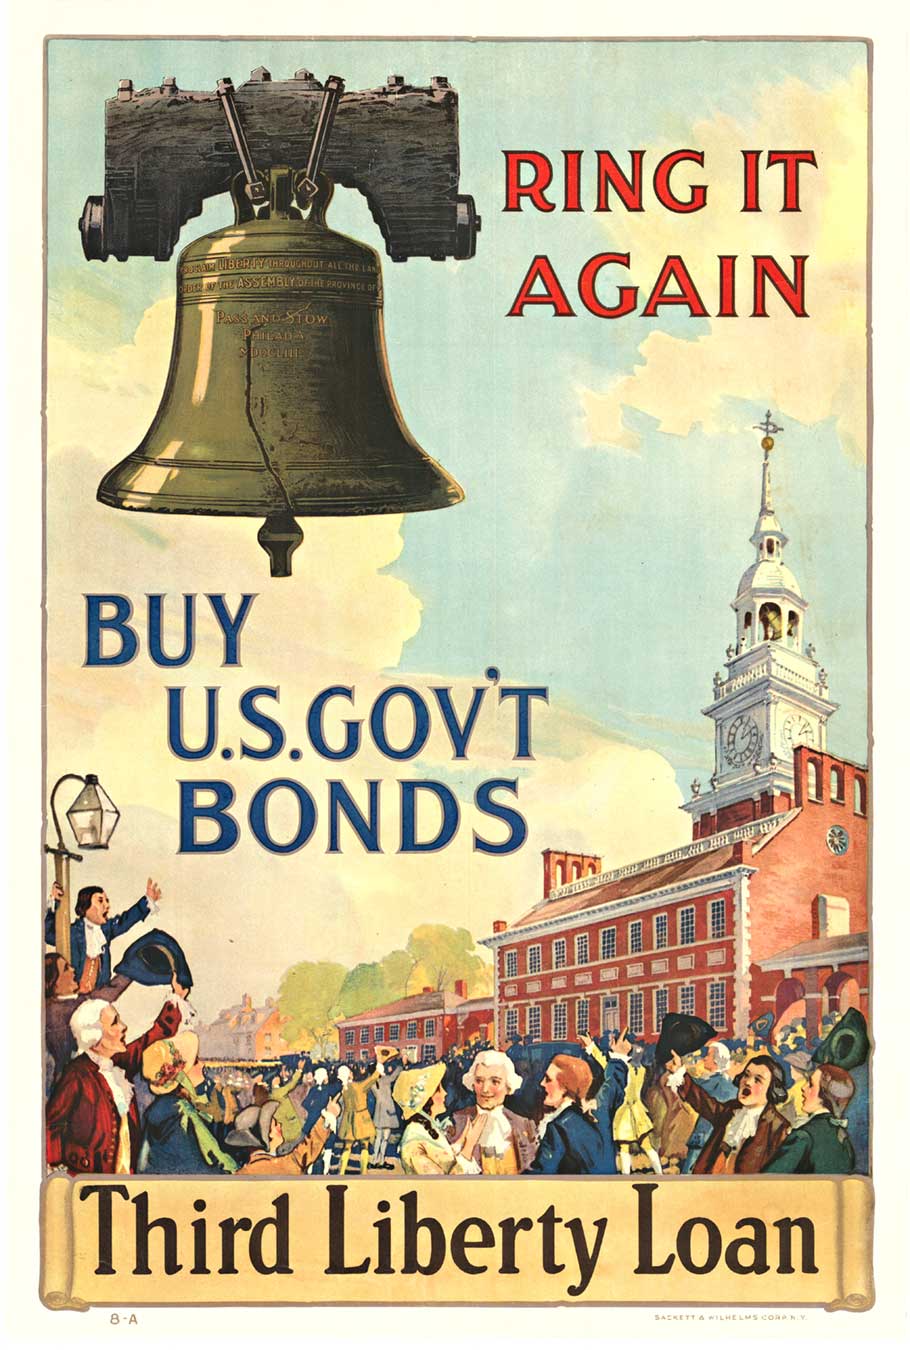 liberty bell, church, crowd, war poster, clouds, military poster, WW1